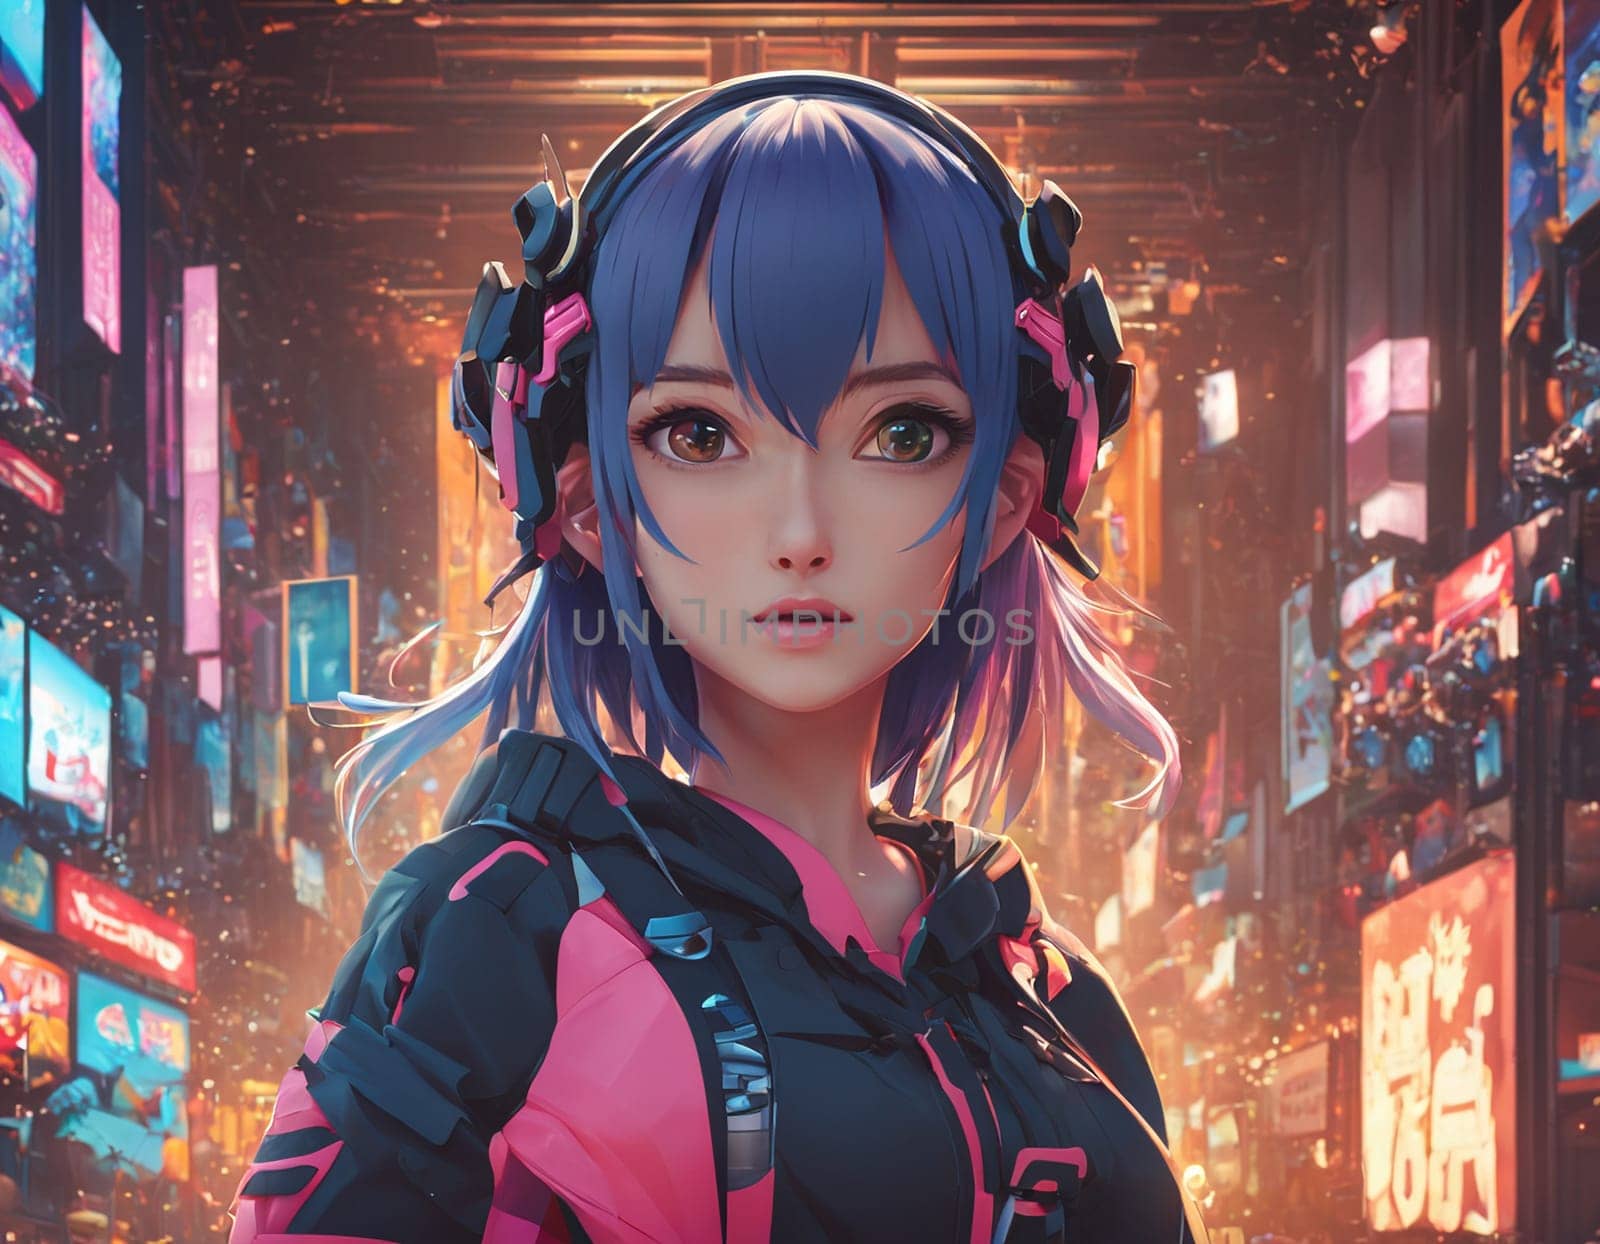 A girl in the anime style. Futurism by NeuroSky